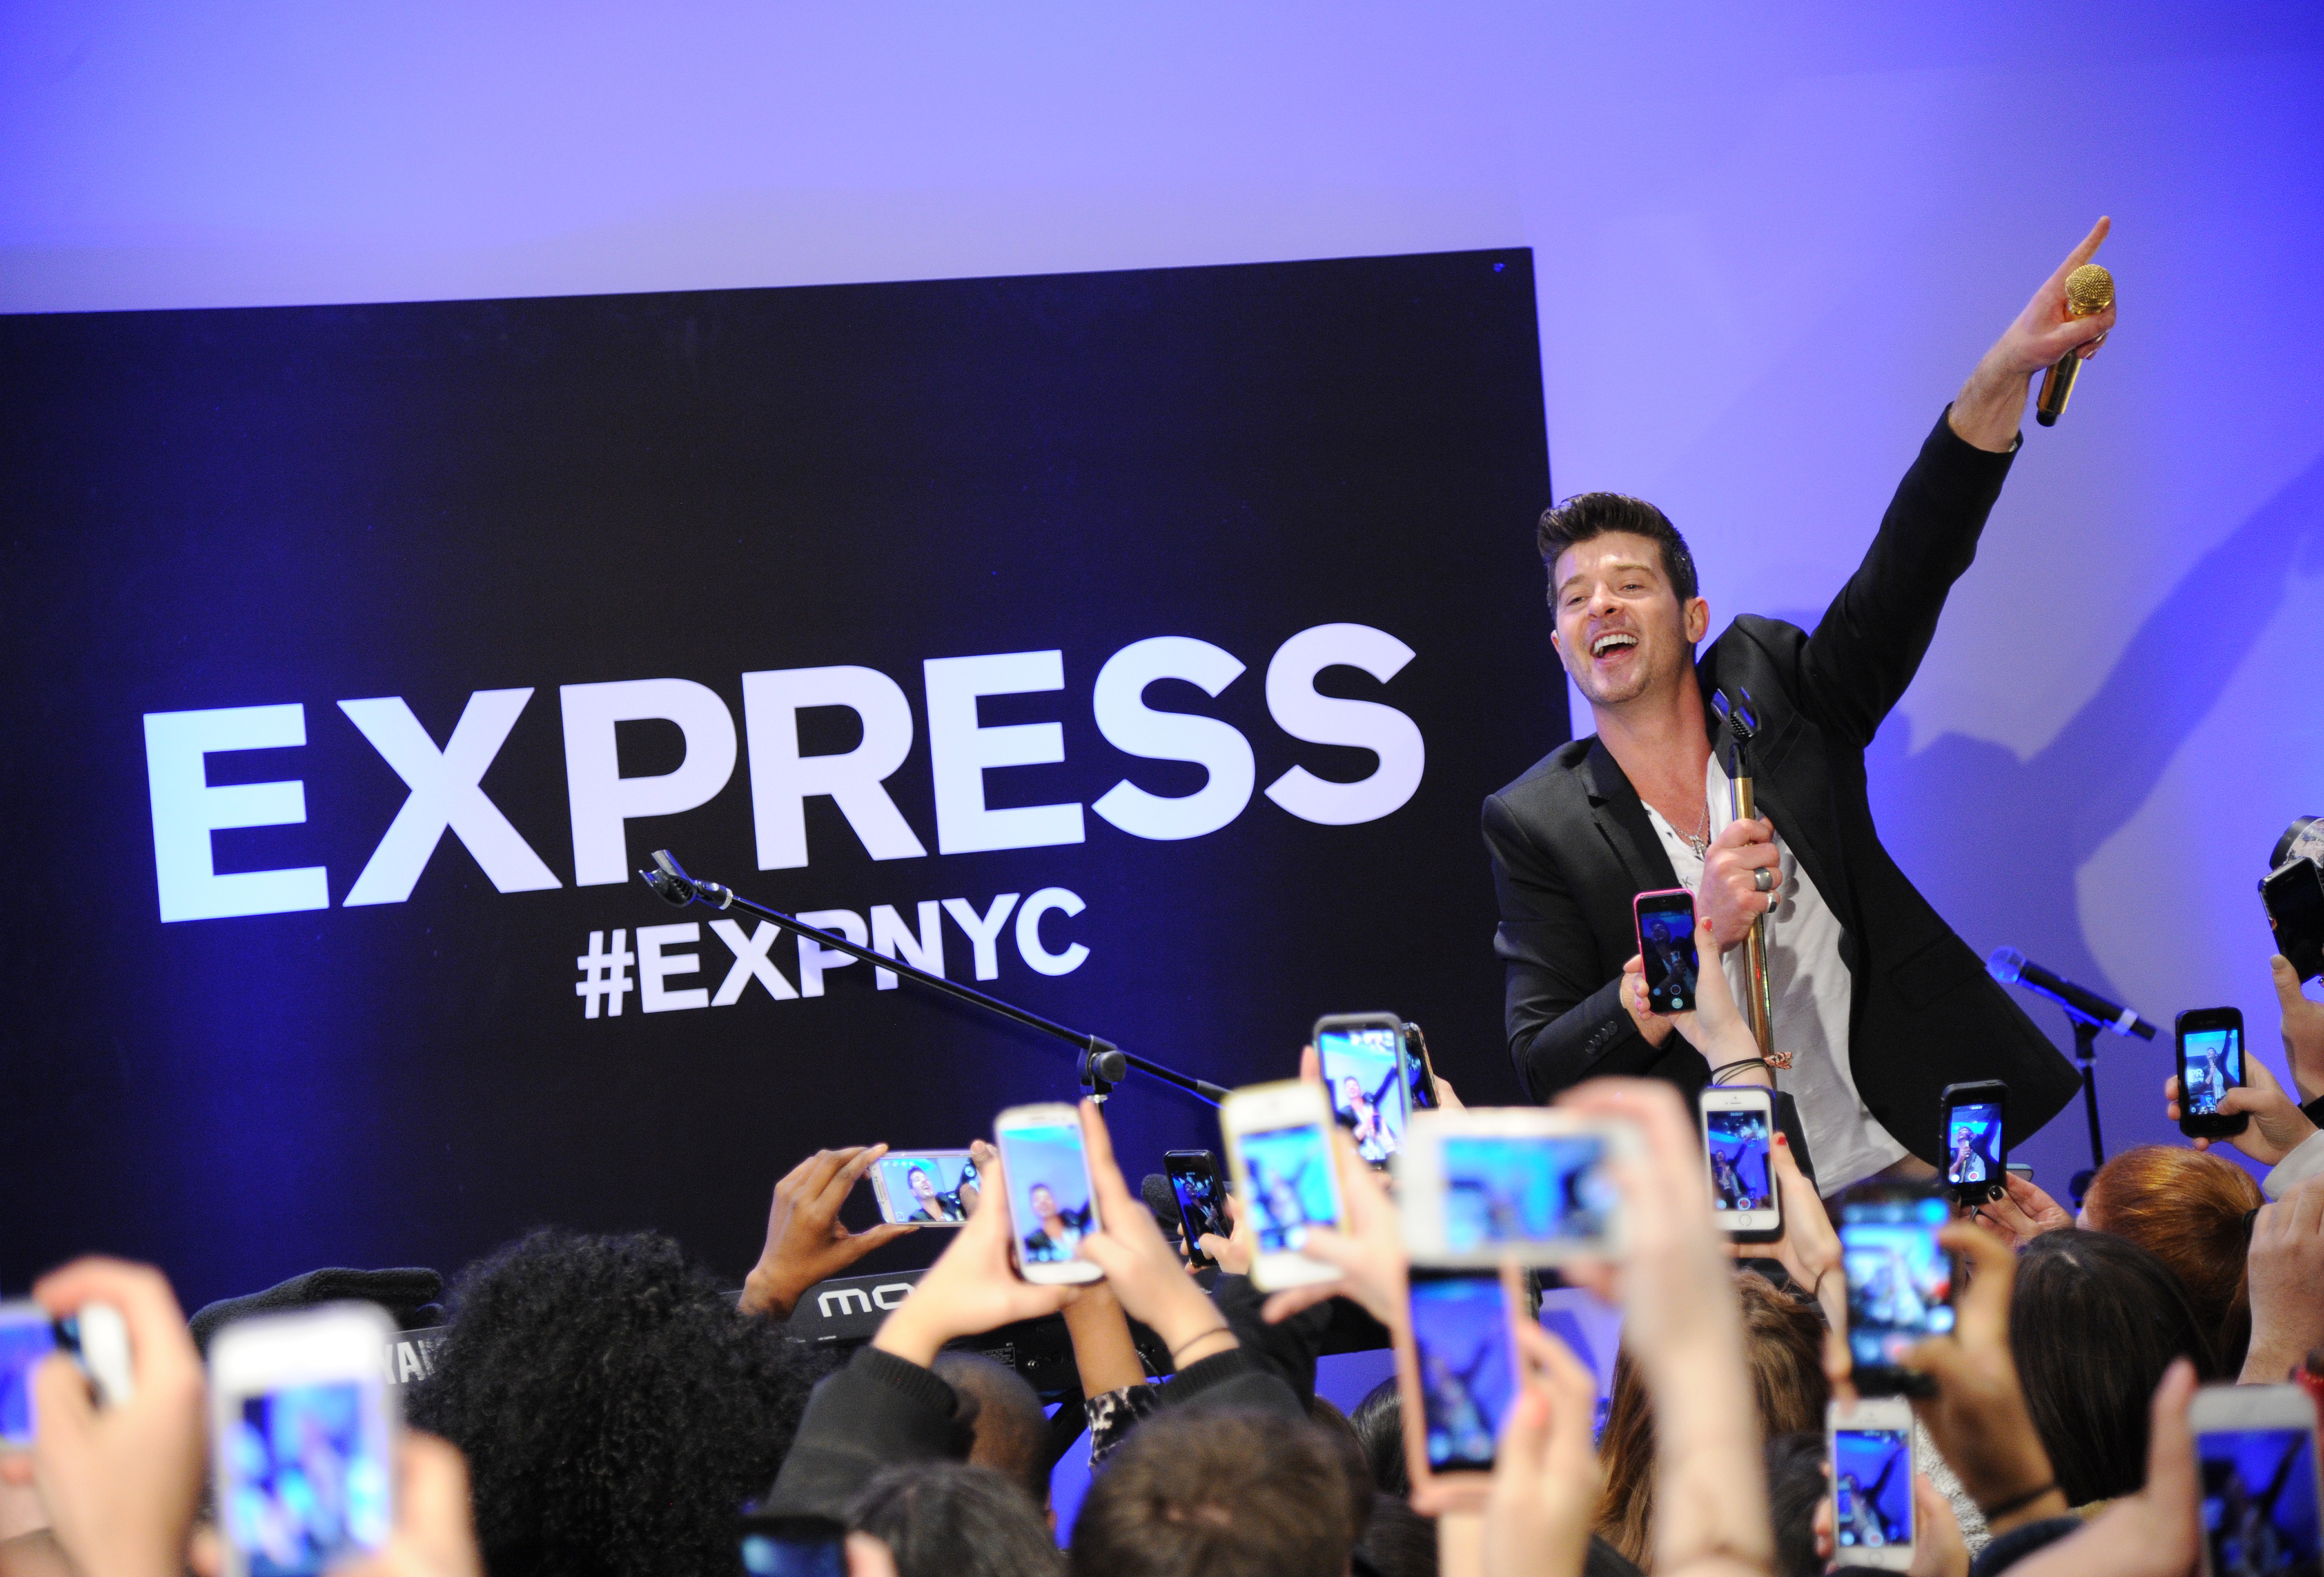 Robin Thicke kicked off the EXPRESS Times Square Grand Opening event with a live performance for crowds of customers on March 25, wearing the EXPRESS Photographer Suit and Henley Graphic Tee. The performance was broadcasted via live stream on the retailer’s 9,000 square foot billboards outside the store.  Following the performance, the Blurred Lines star even stopped to take selfies with a few lucky fans!